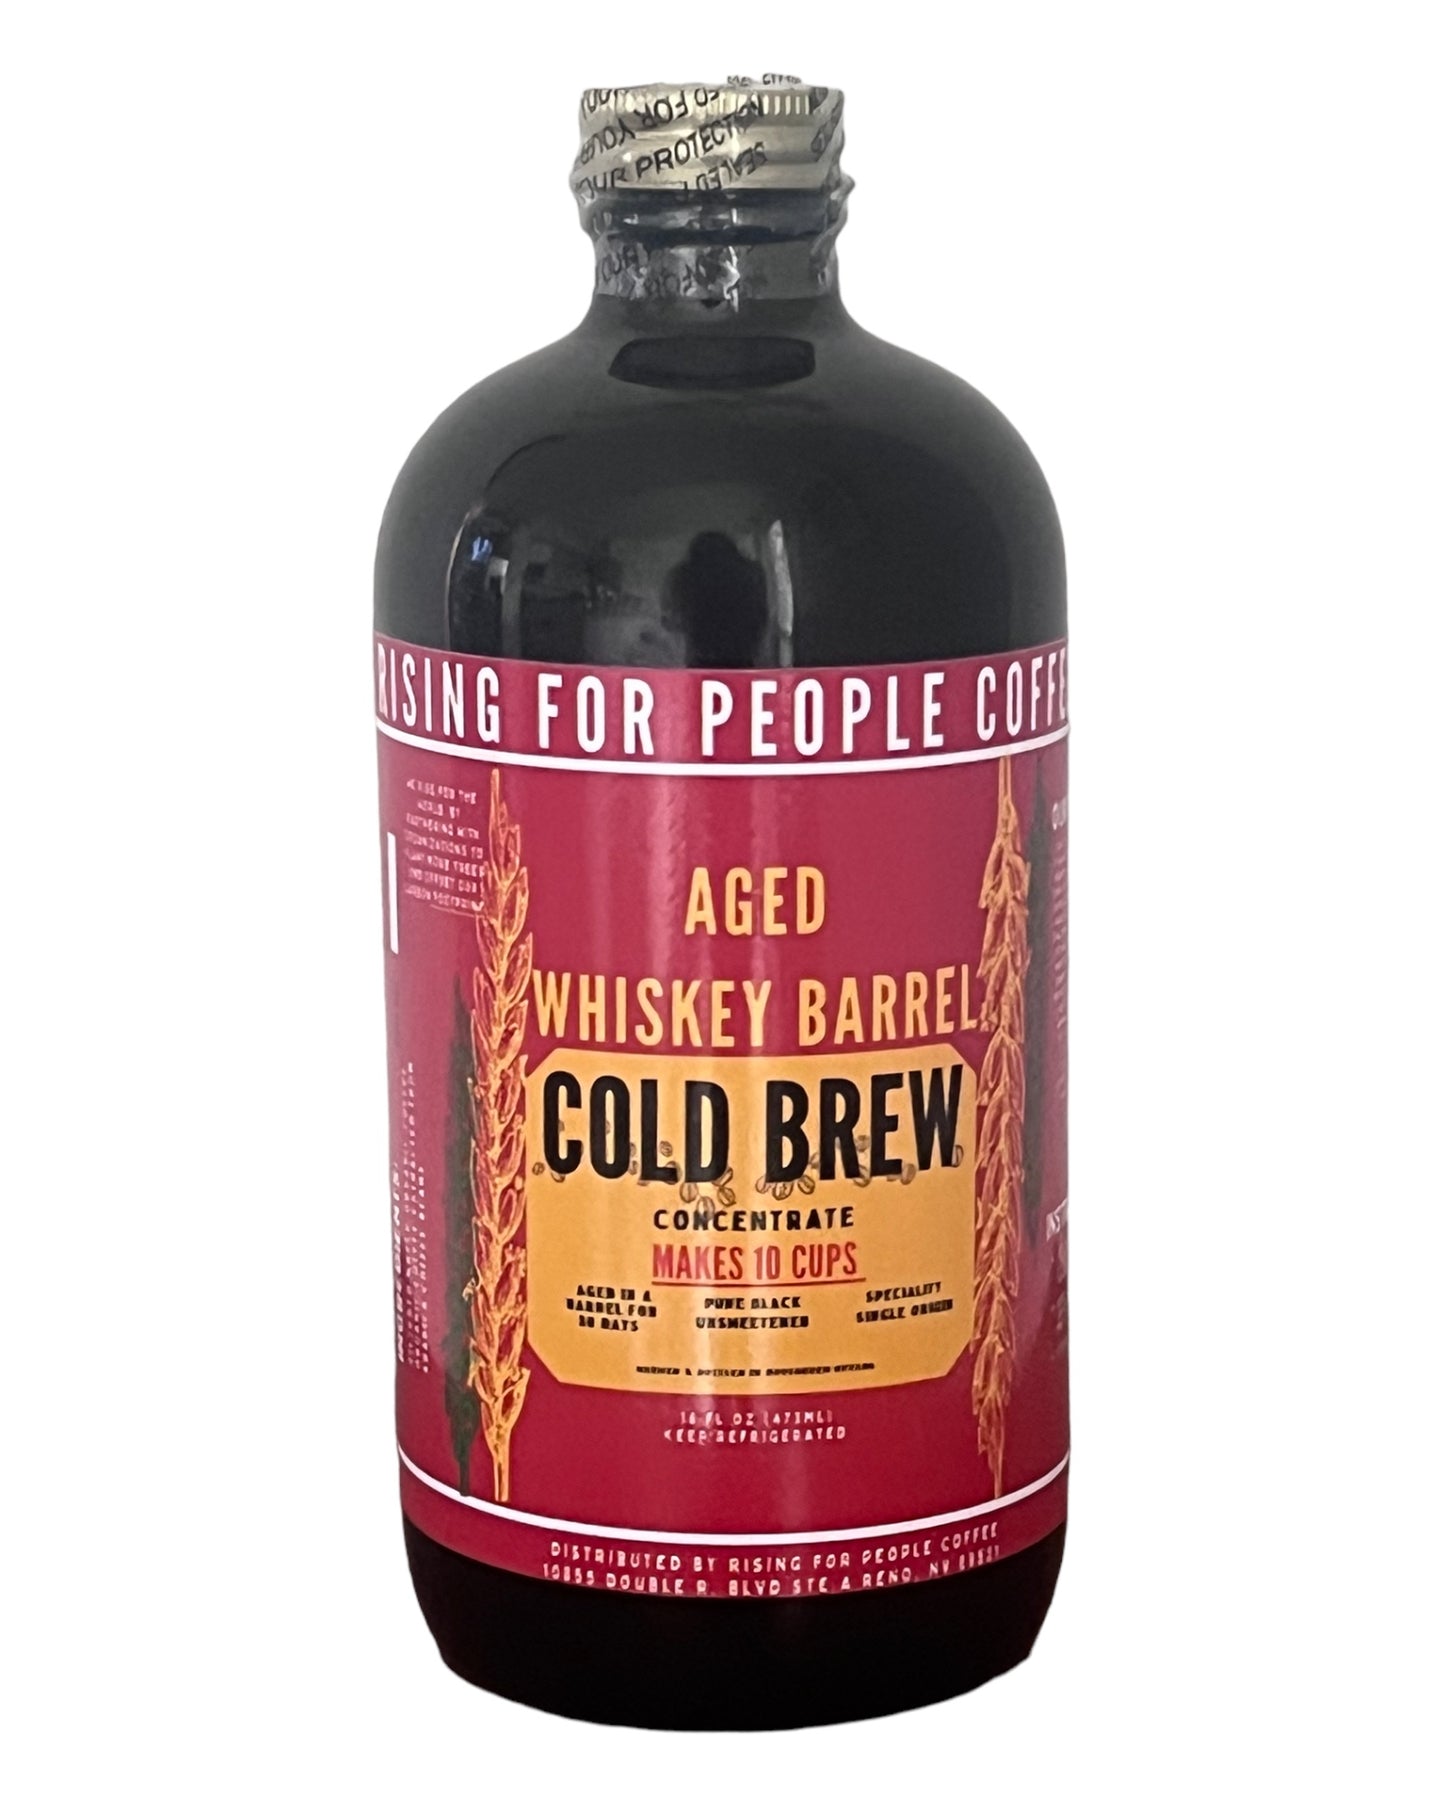 Aged Whiskey Barrel Concentrated Cold Brew